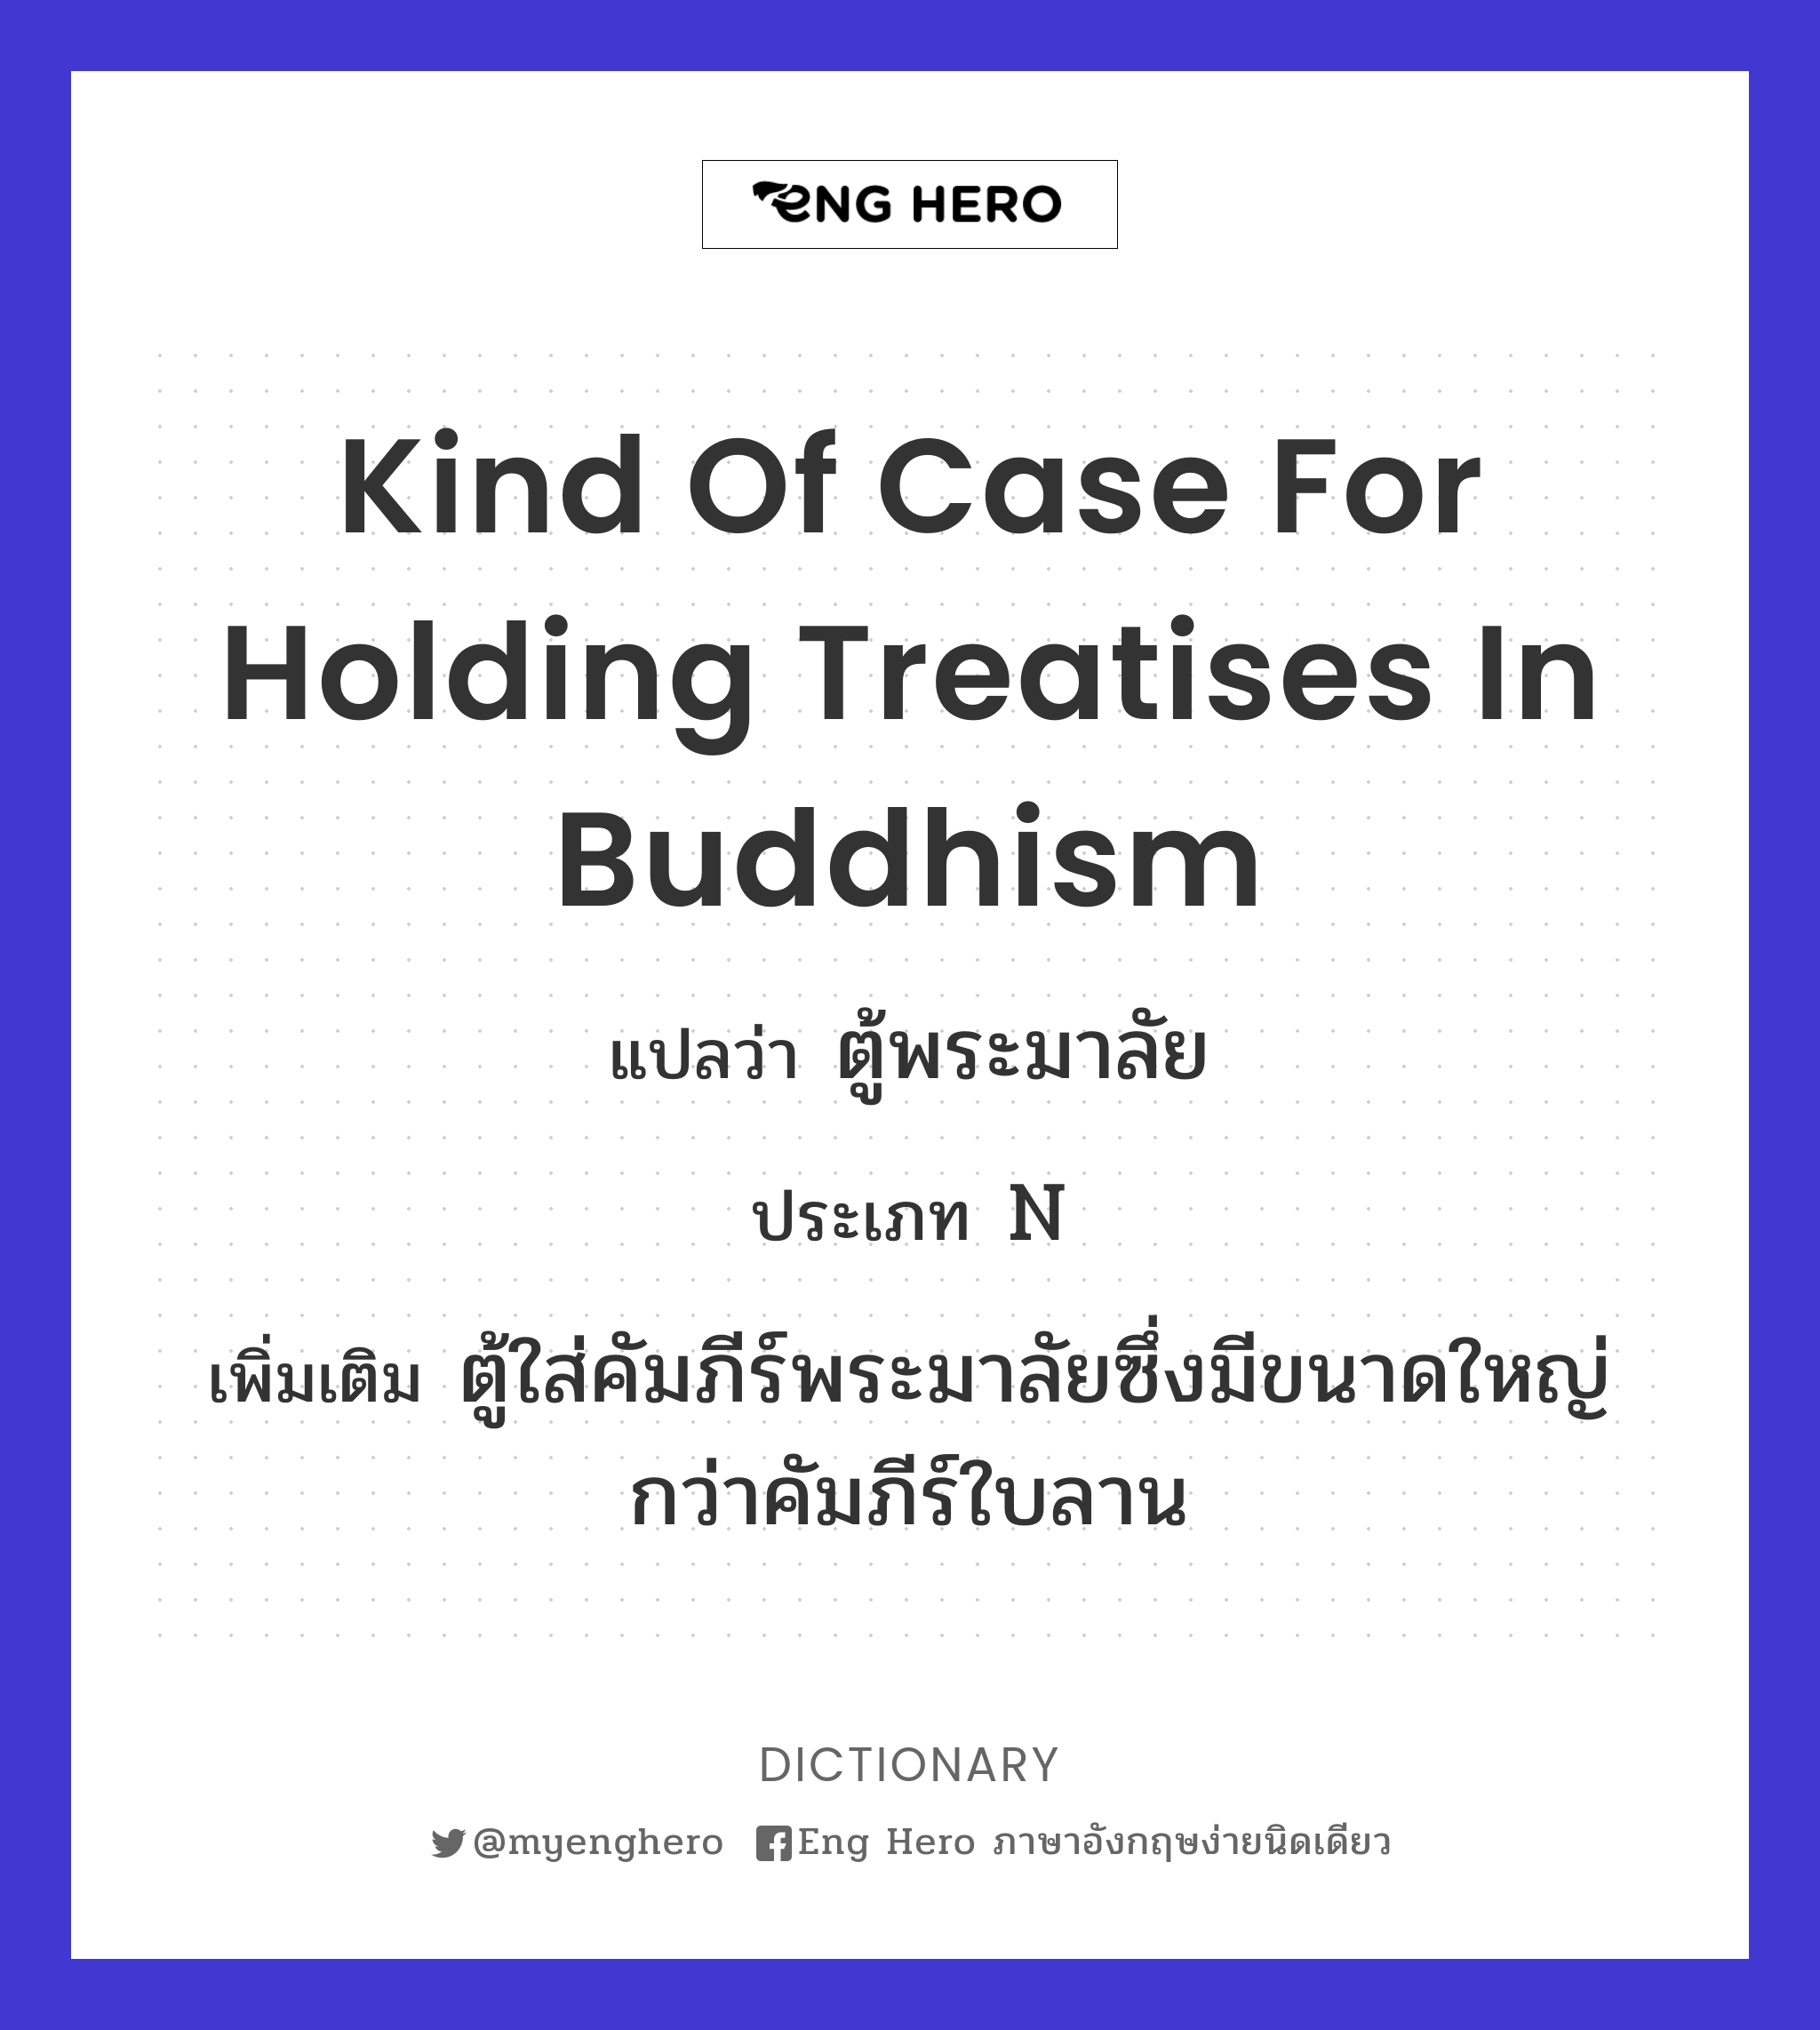 kind of case for holding treatises in Buddhism